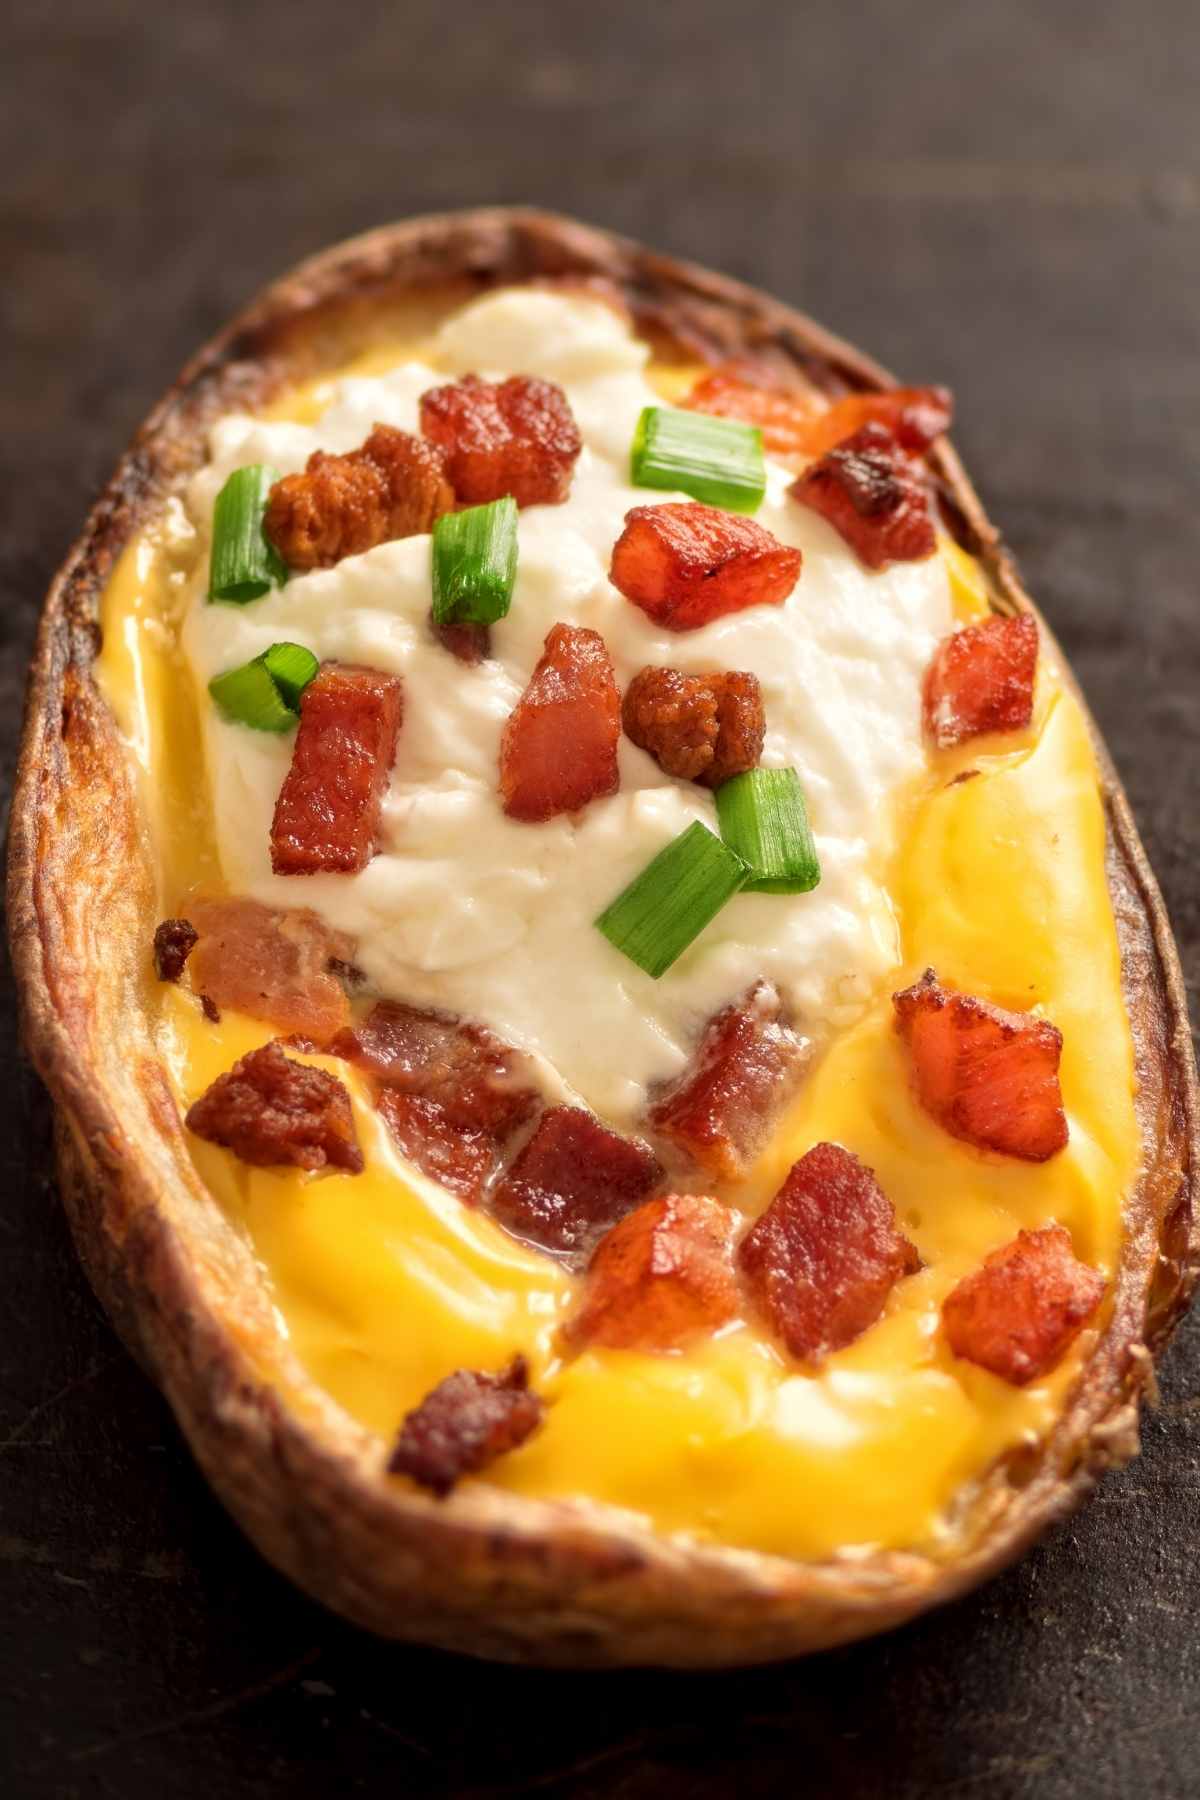 If you love the potato skins served at TGI Fridays, you’ll want to try this copycat recipe. It’s the perfect dish to serve to a crowd when you’re hosting game day or movie night.